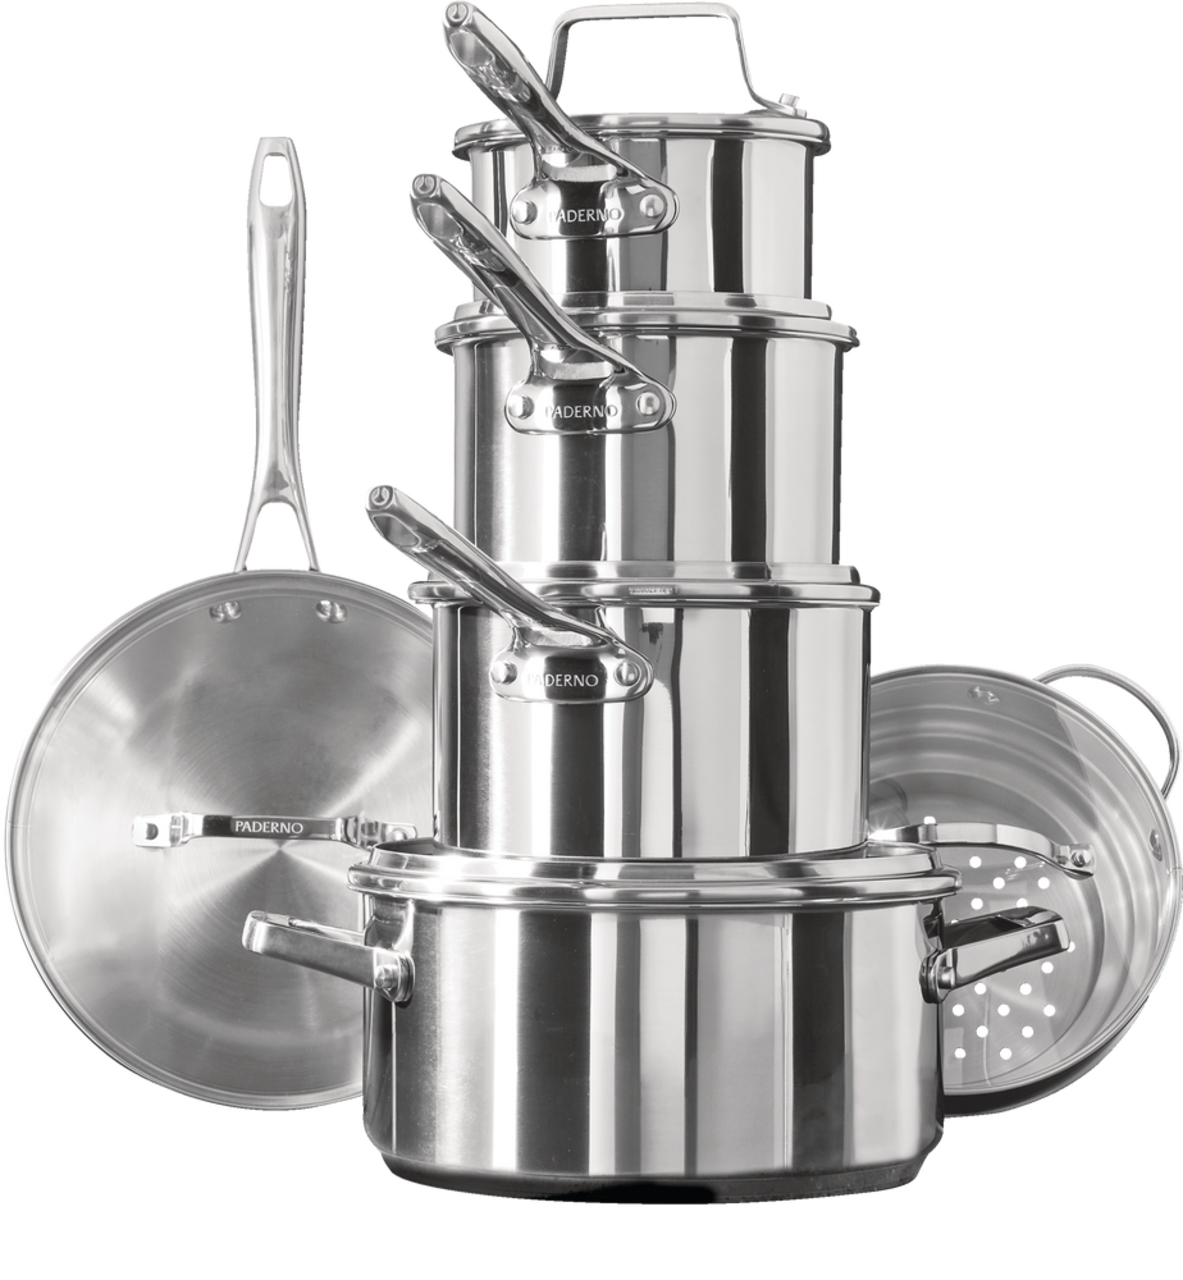 https://media-www.canadiantire.ca/product/living/kitchen/cookware/1423468/paderno-12pc-copper-core-stainless-steel-cookset-7dc56c4f-d12e-4020-a757-bf3d7f6e8cdf.png?imdensity=1&imwidth=640&impolicy=mZoom